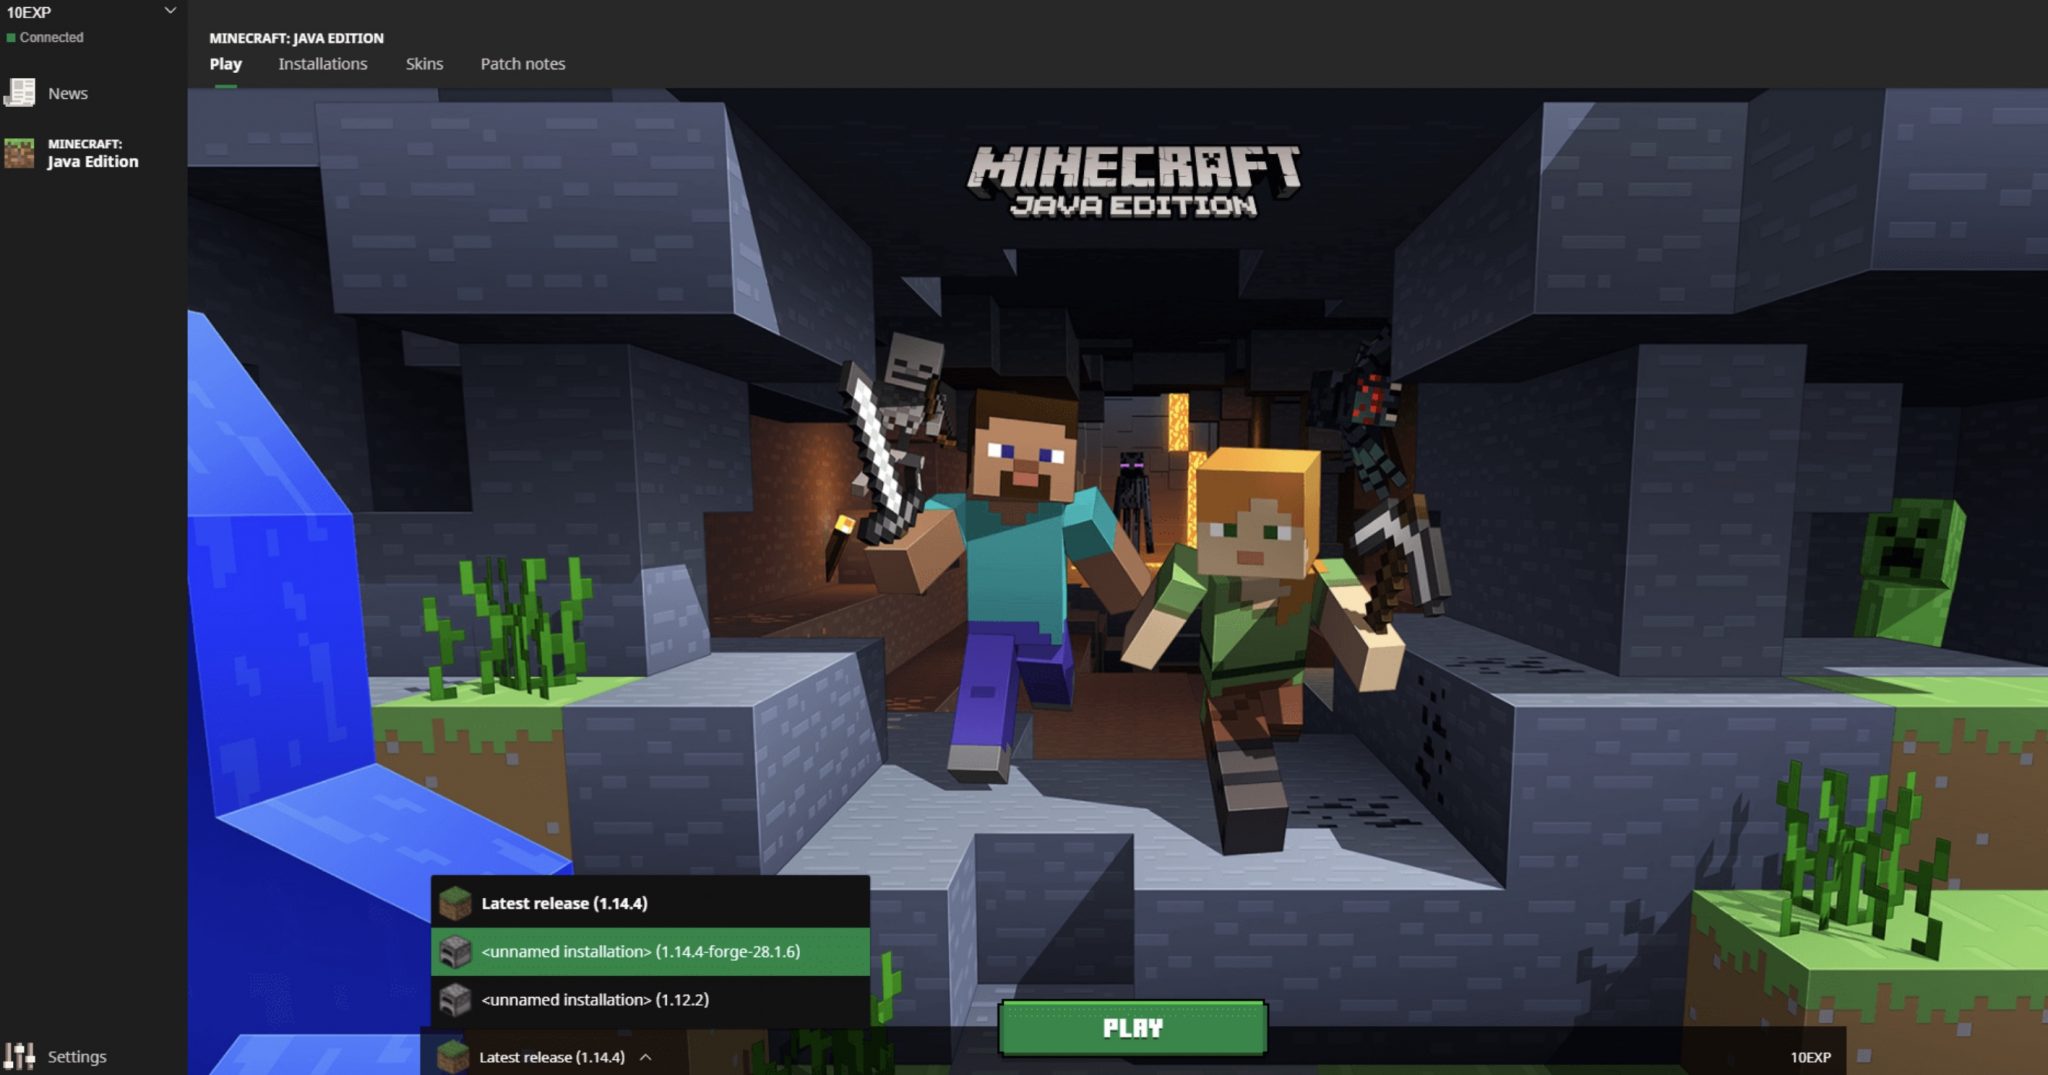 Minecraft Forge 1.17: How to Download - GamePlayerr